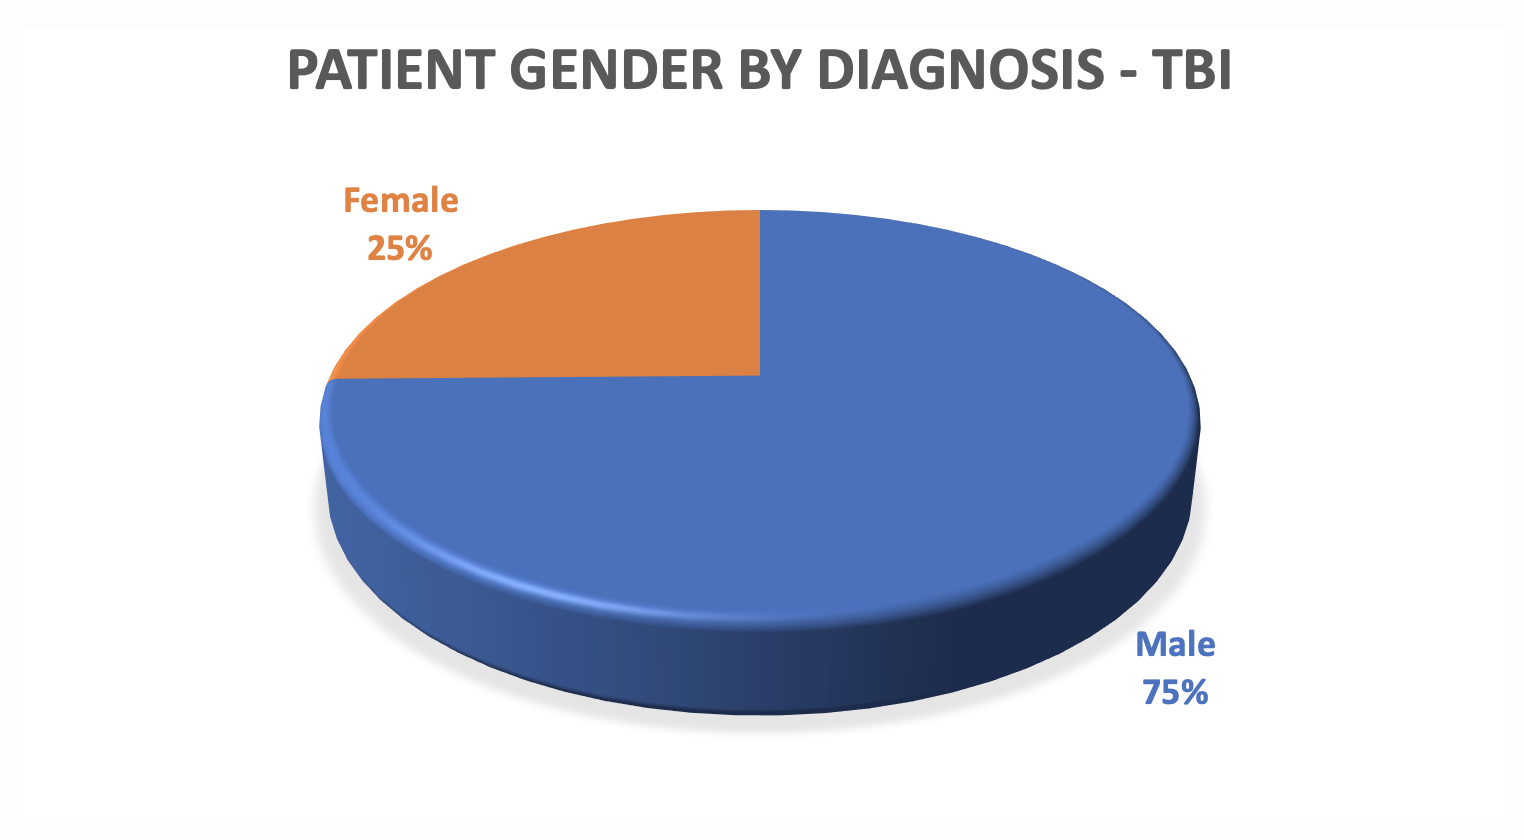 image of pie chart reveals patient gender data for TBI at Pate Rehab